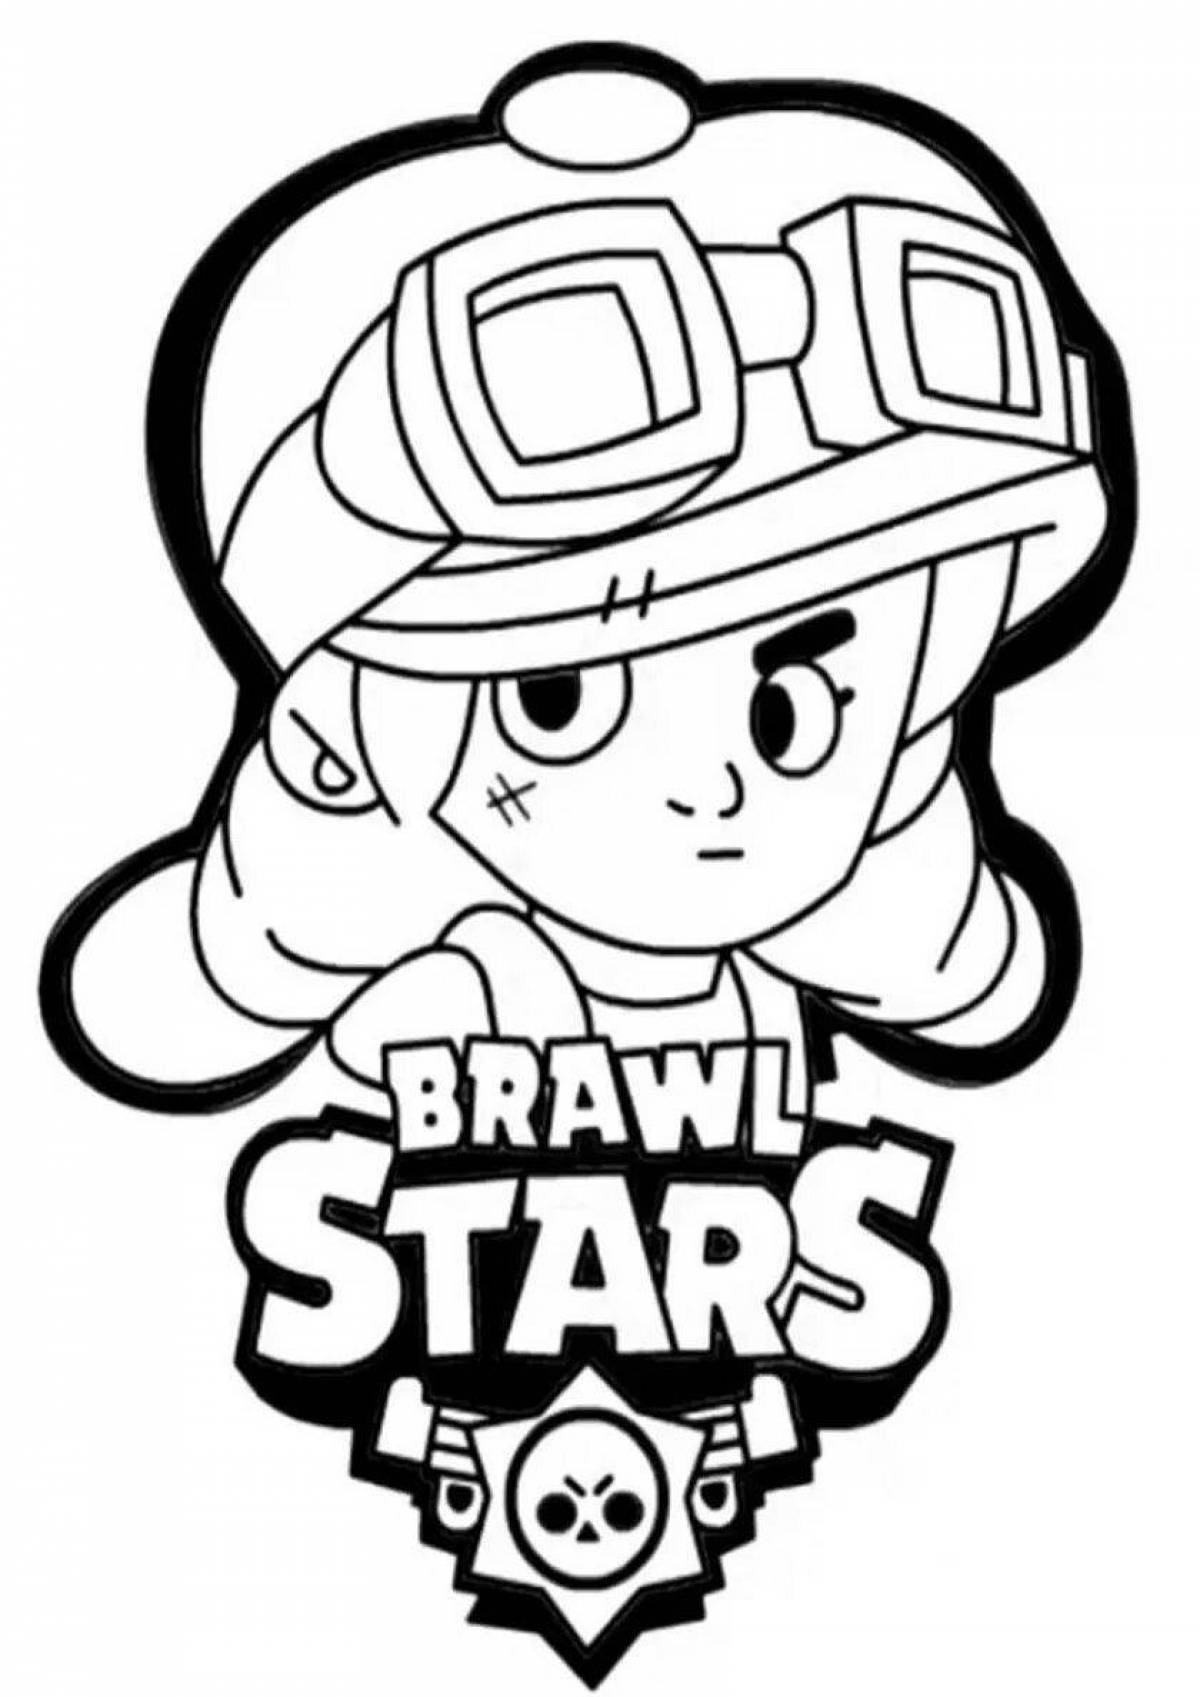 Shiny stars coloring page